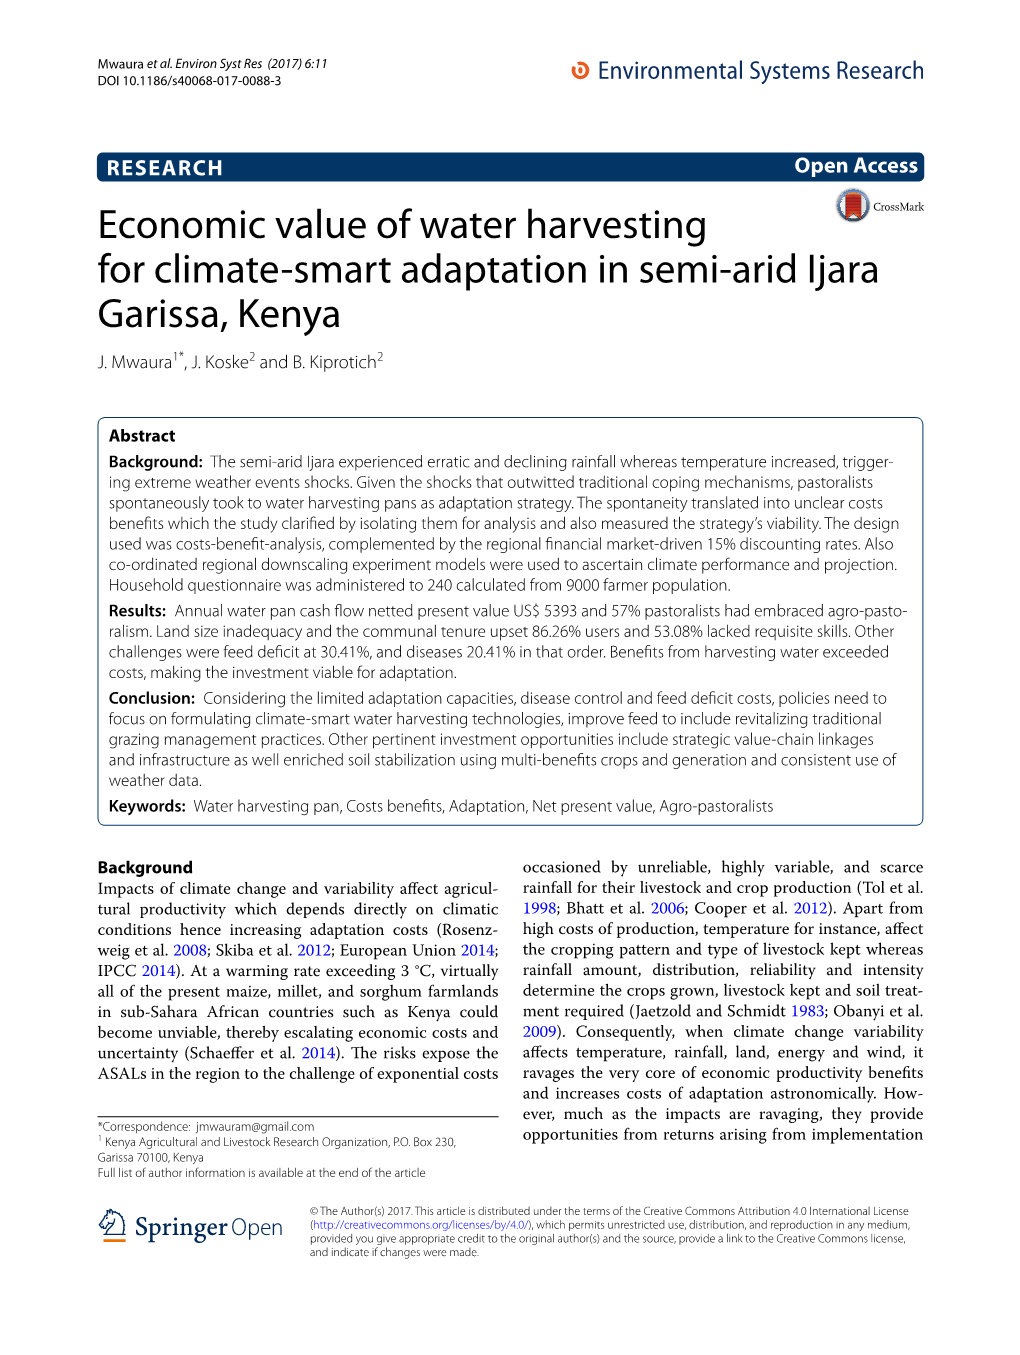 Economic Value of Water Harvesting for Climate-Smart Adaptation in Semi